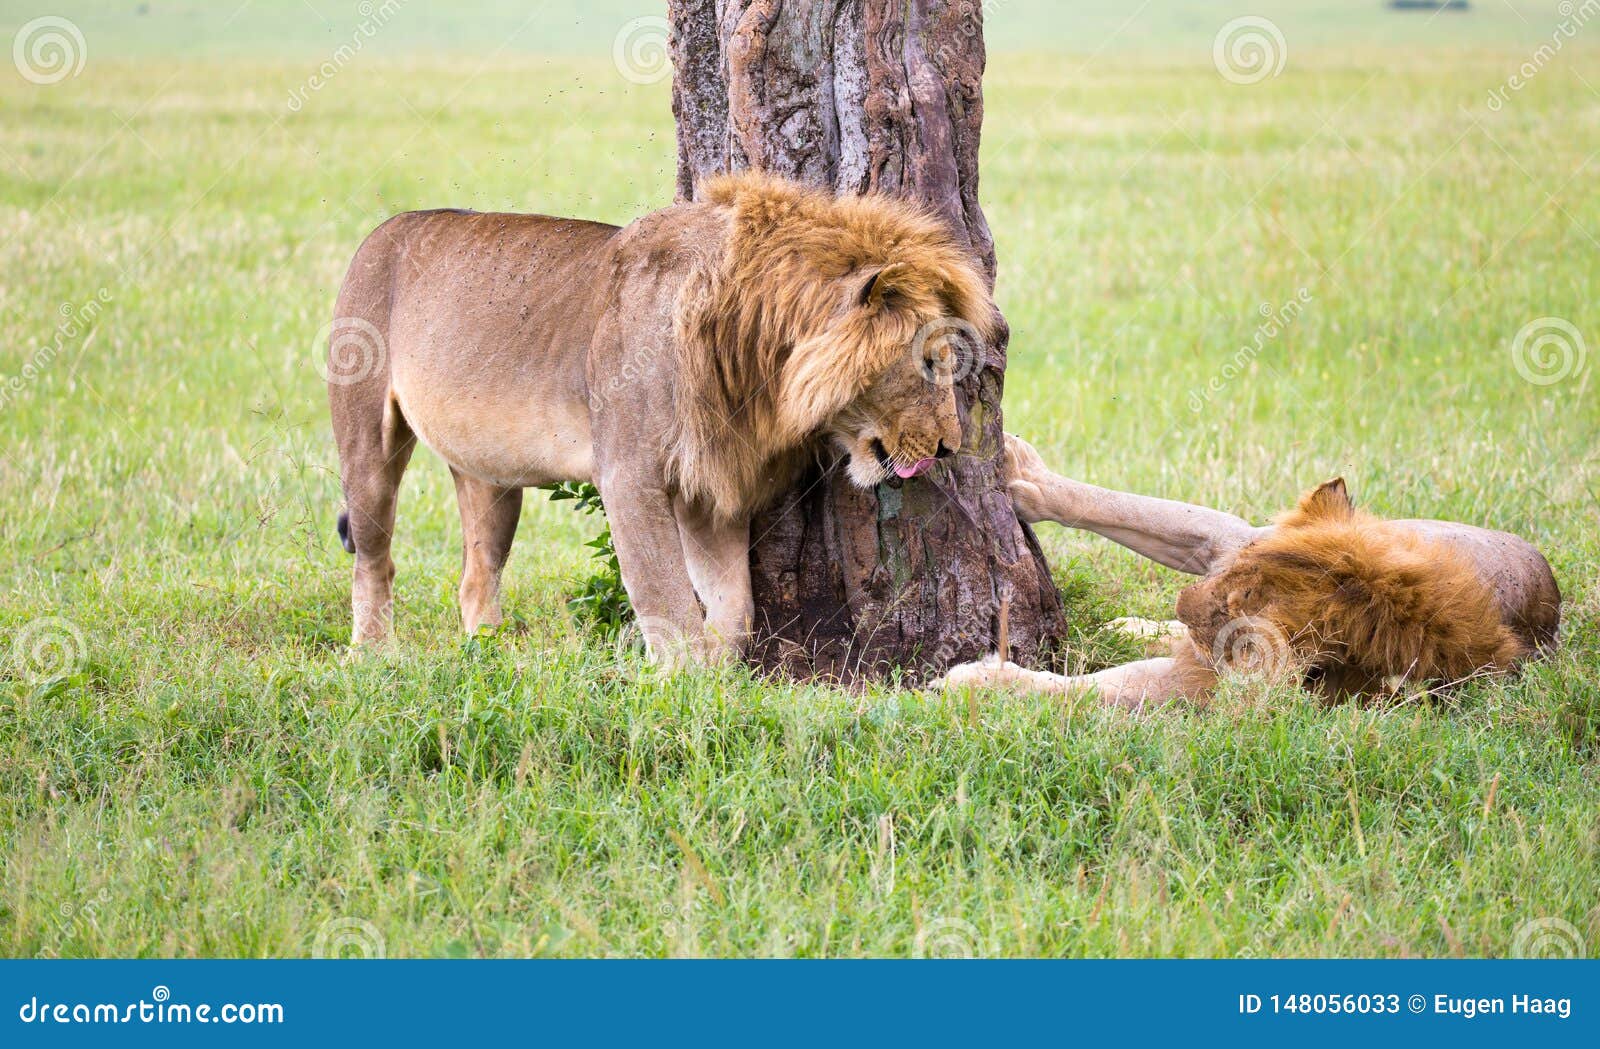 Two Big Lions Show Their Emotions To Each Other in the Savanna of Kenya ...